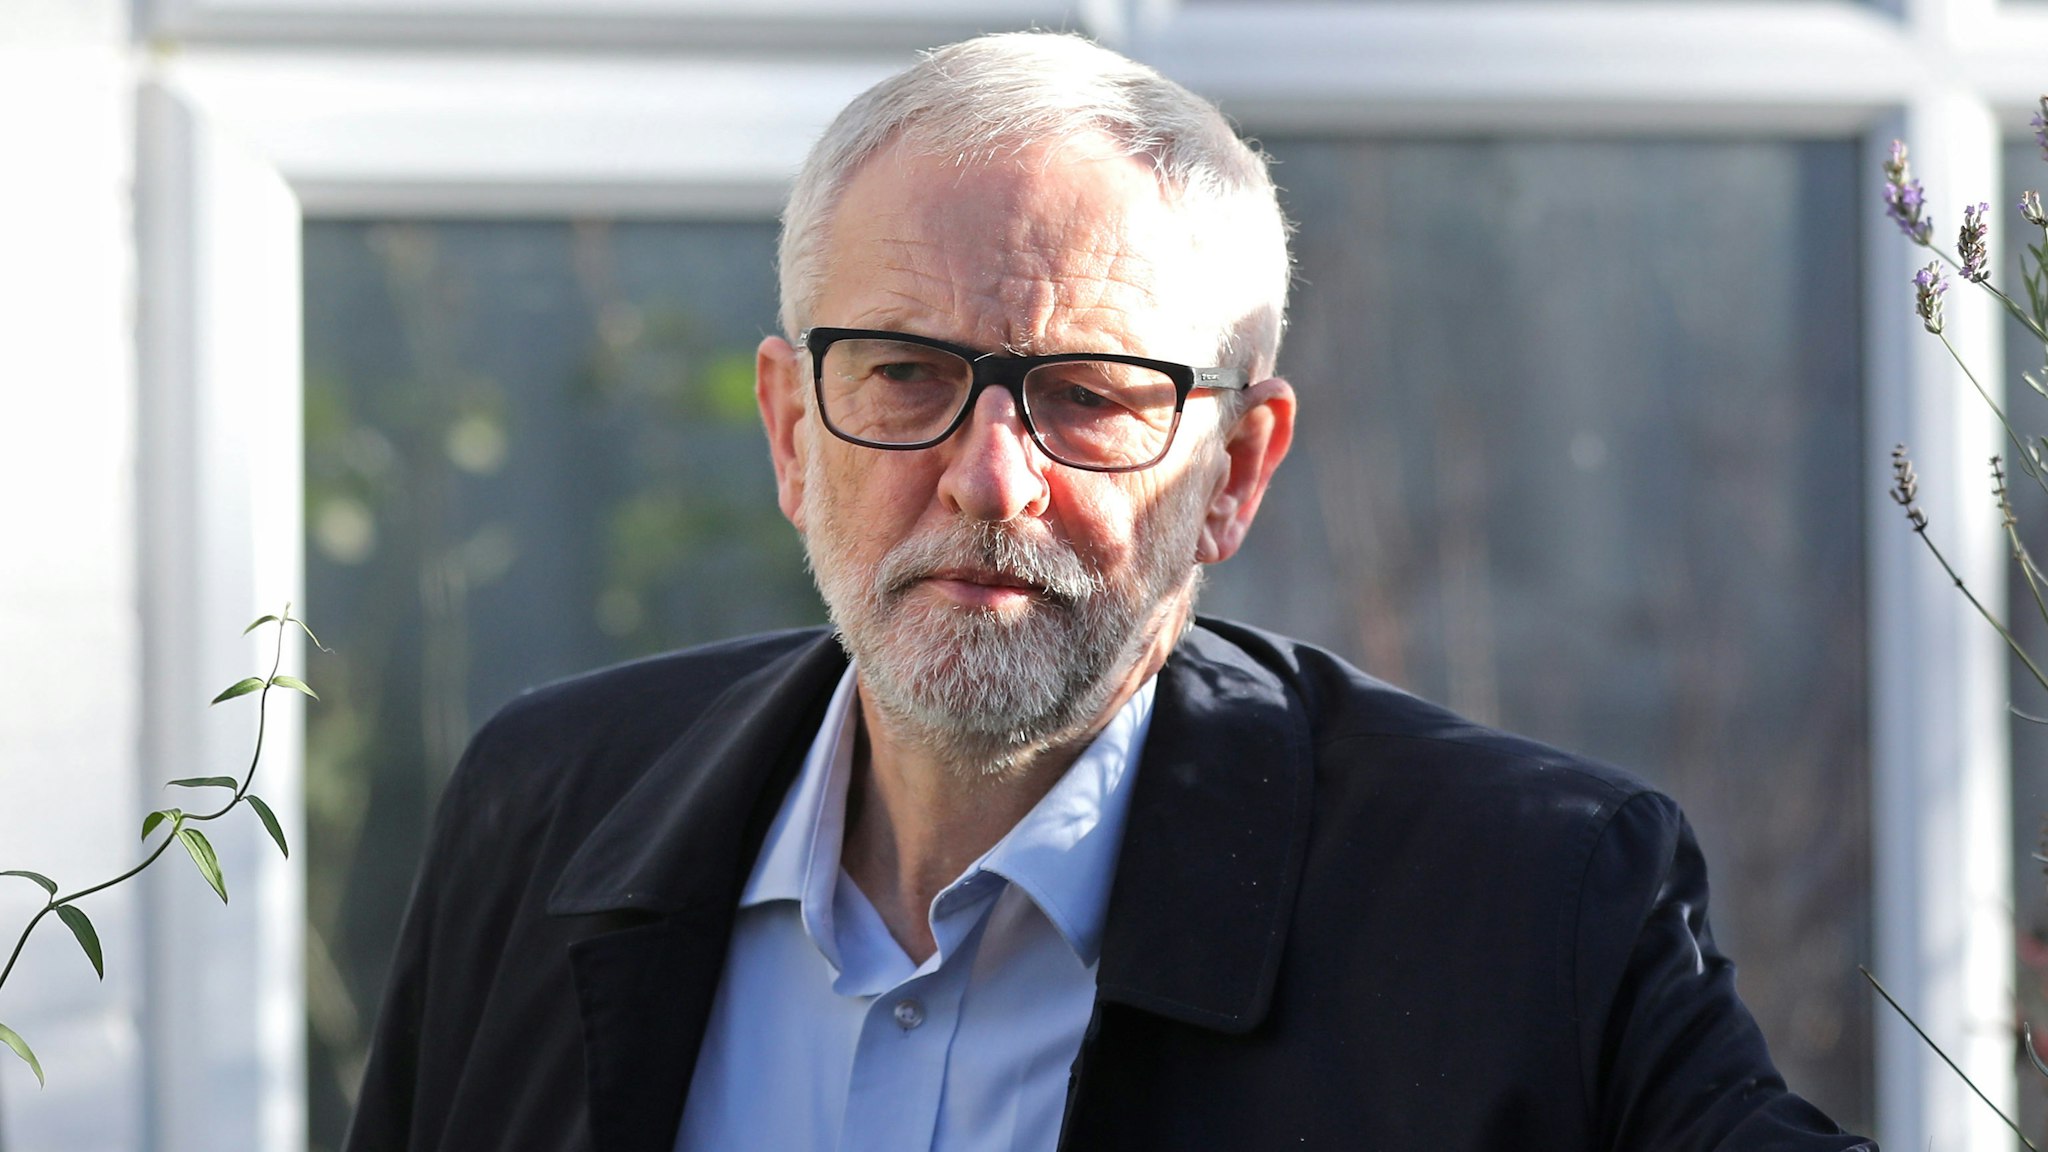 Labour Party leader Jeremy Corbyn leaves his home in Islington, north London.